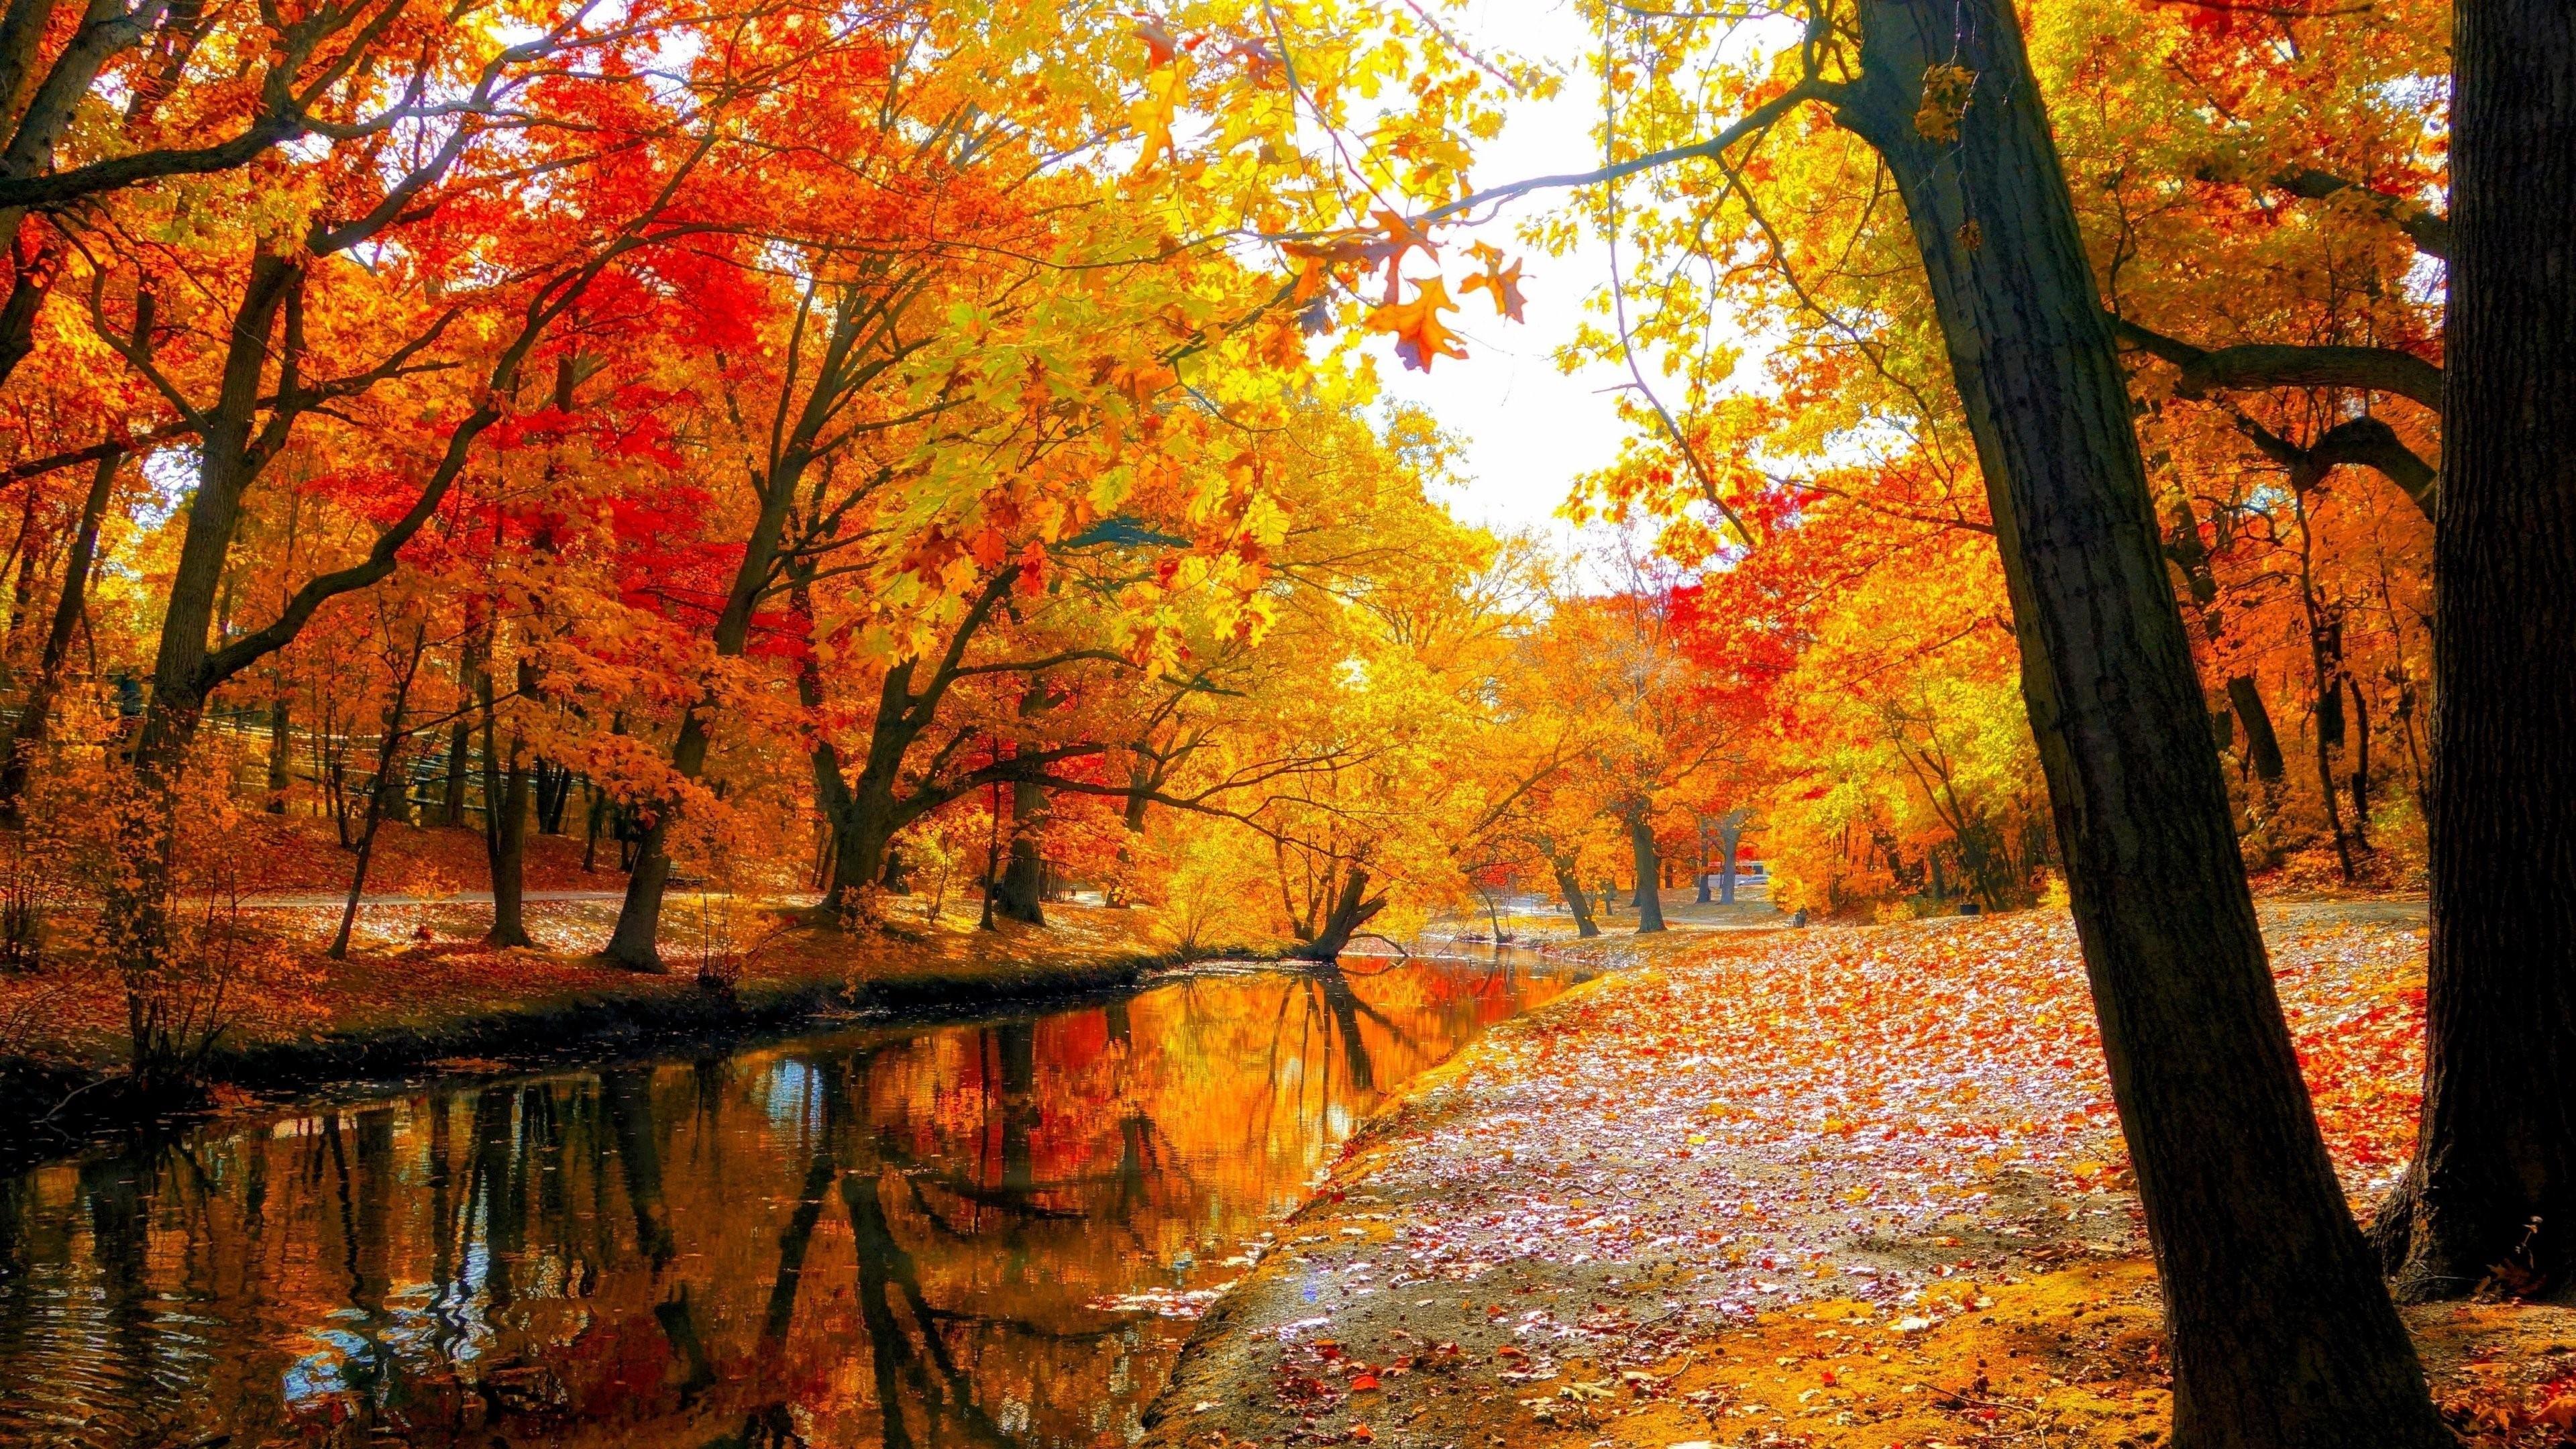 Autumn Trees Wallpapers - Wallpaper Cave